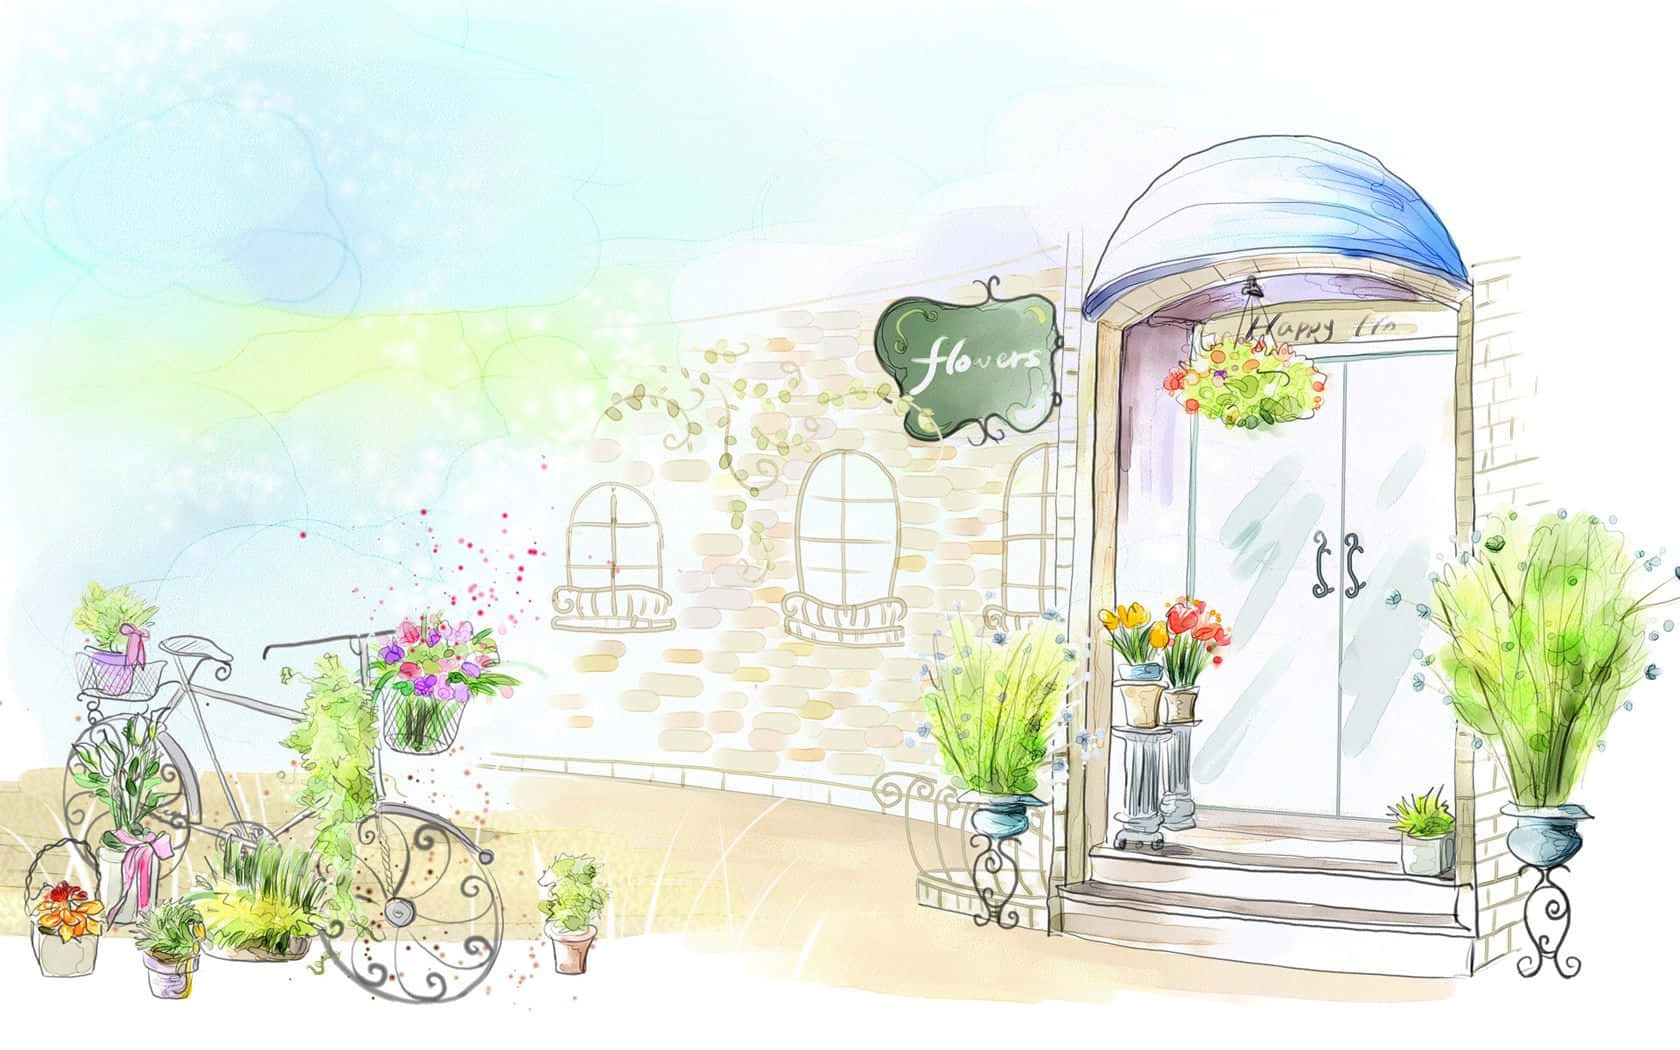 Watercolor Illustration Of A Flower Shop With Bicycle And Potted Plants